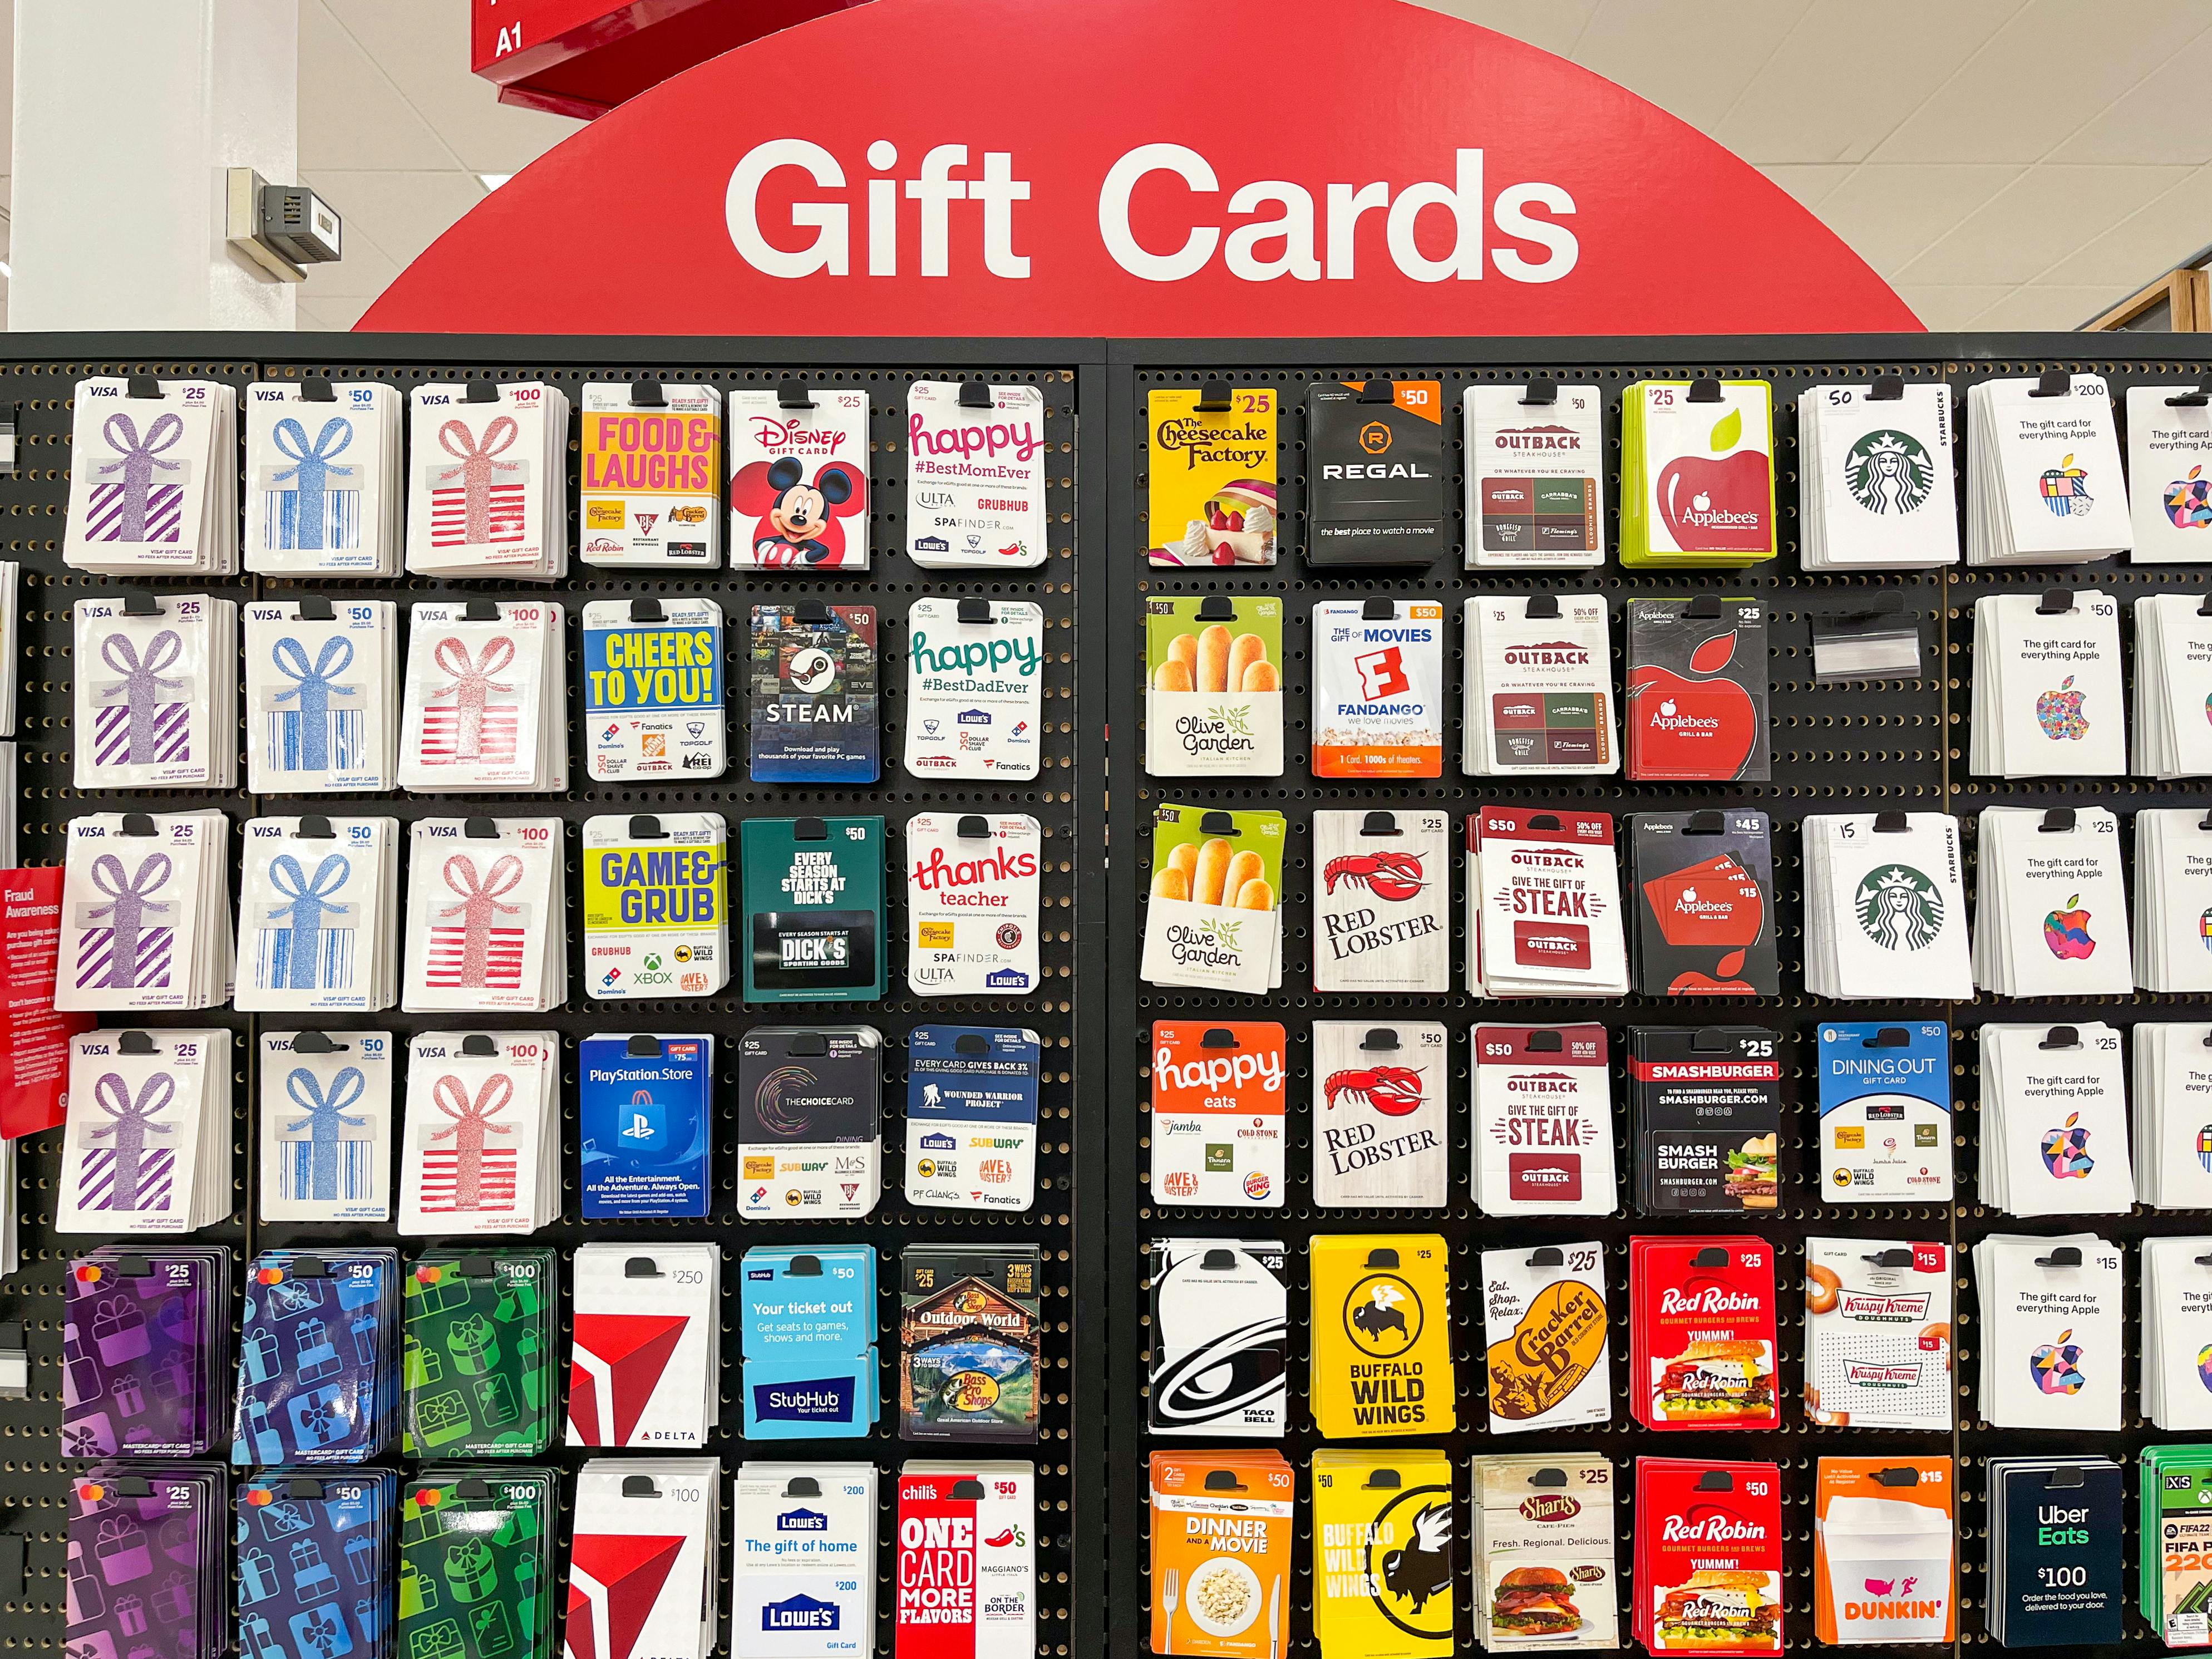 Does Costco Sell Amazon Gift Cards?